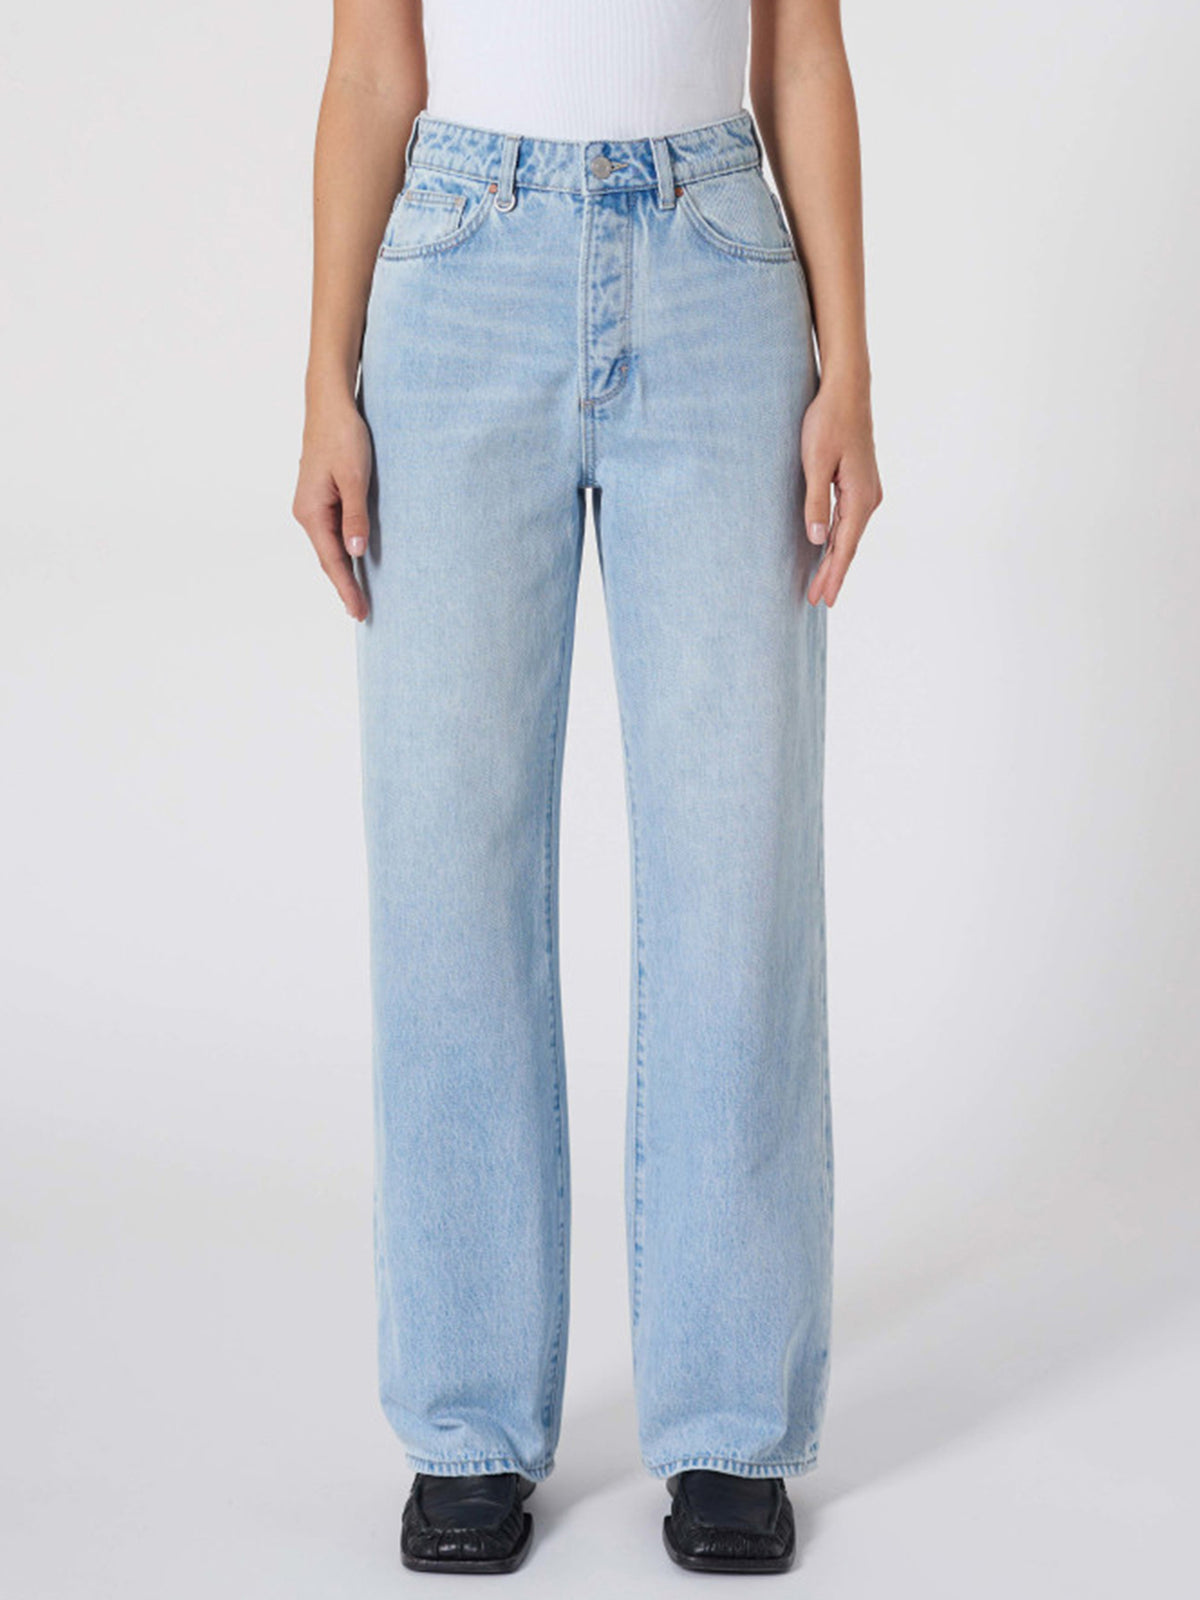 Coco Relaxed Jeans in Jetlag Light Vintage Indigo